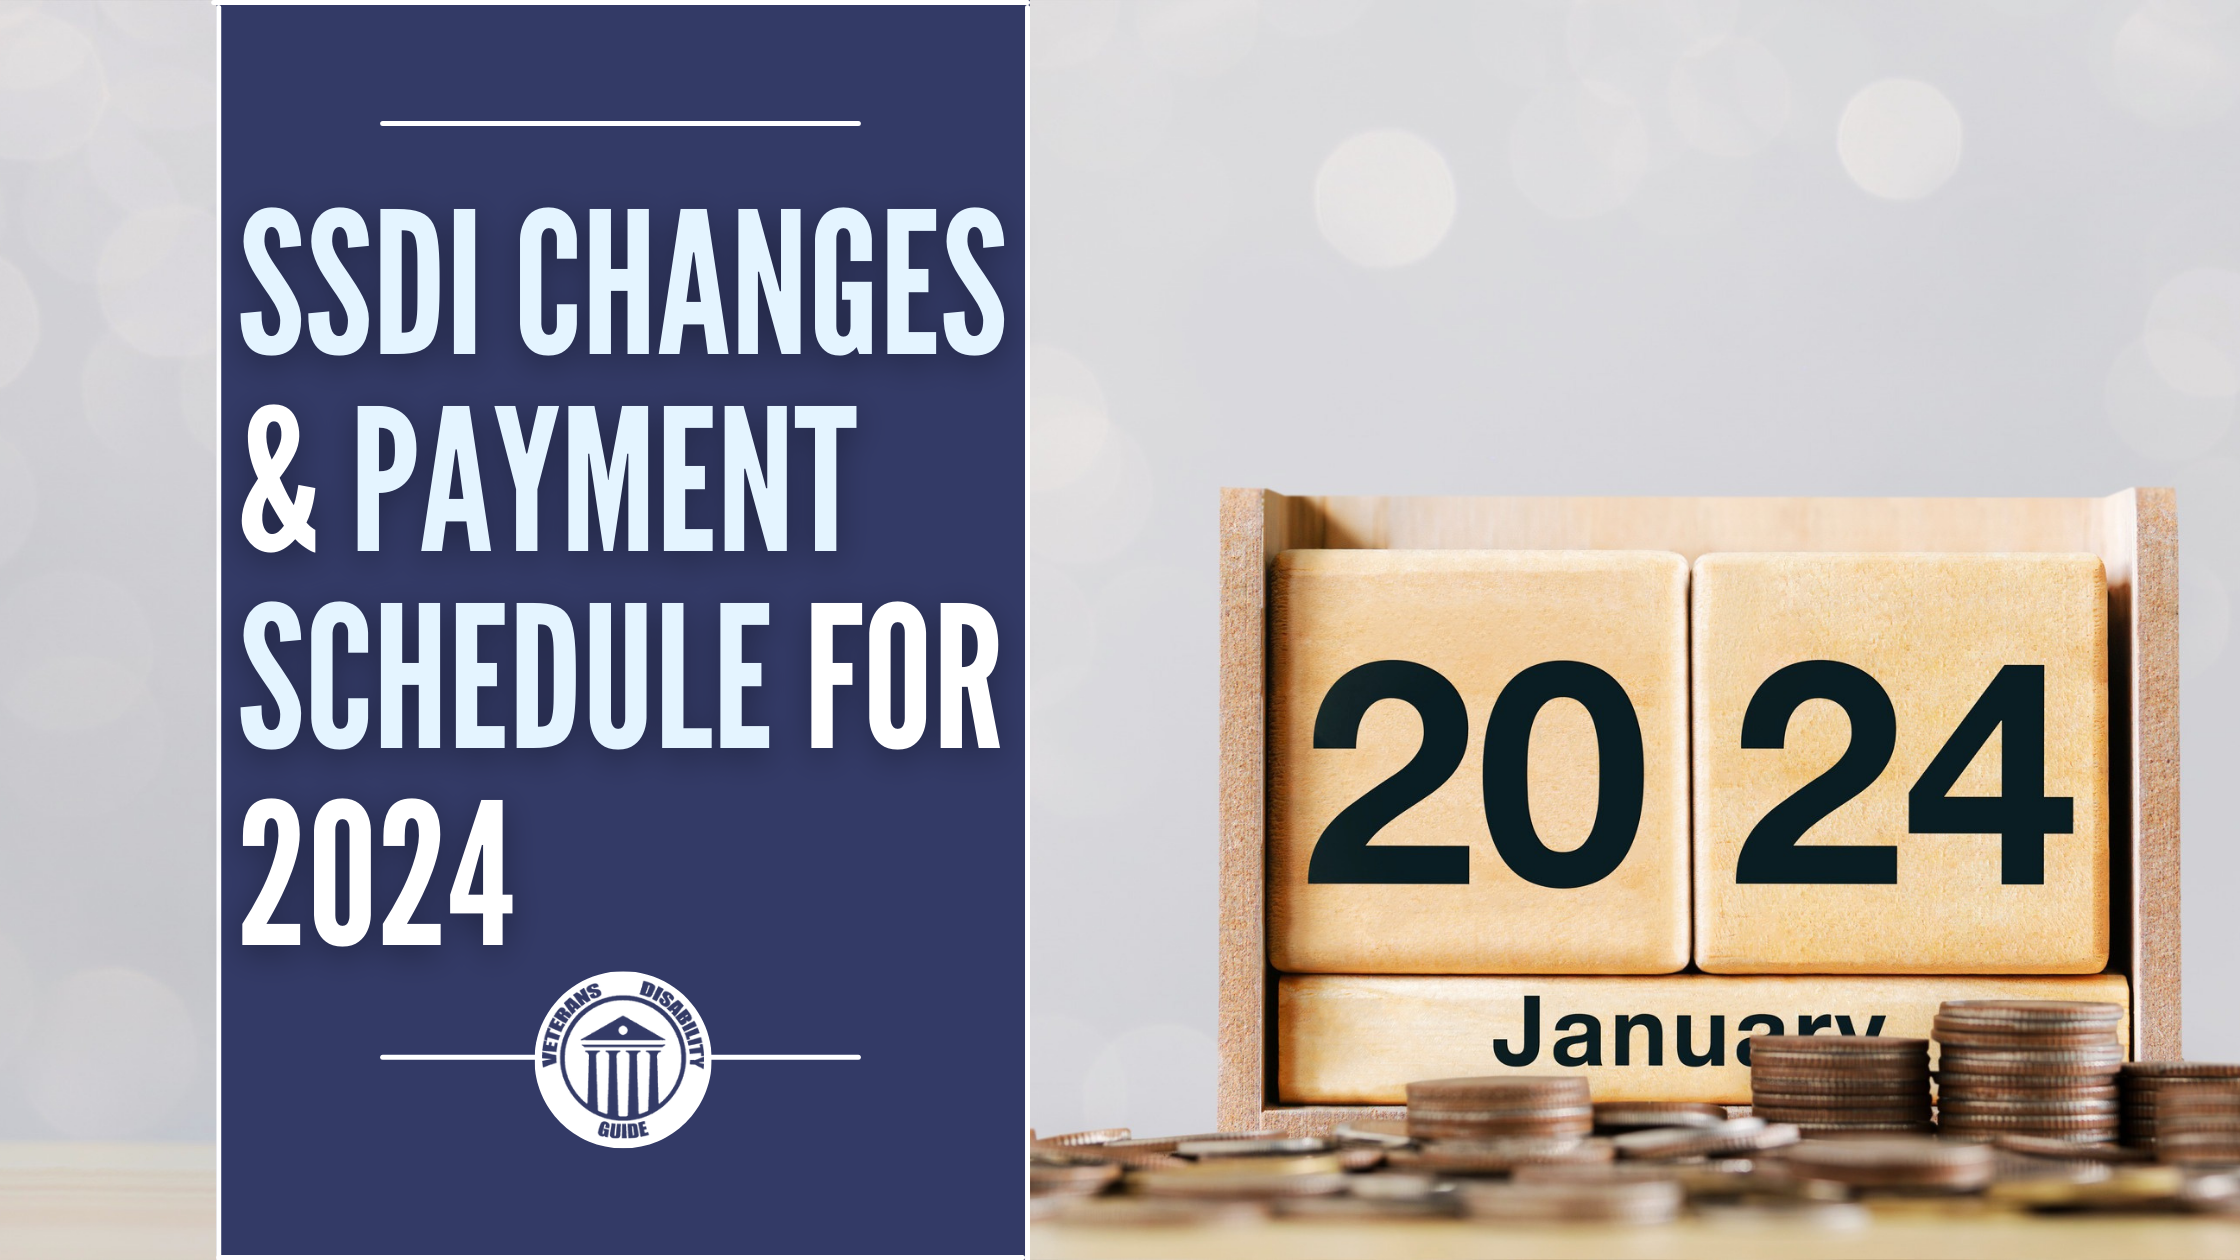 SSDI Changes & Payment Schedule for 2024